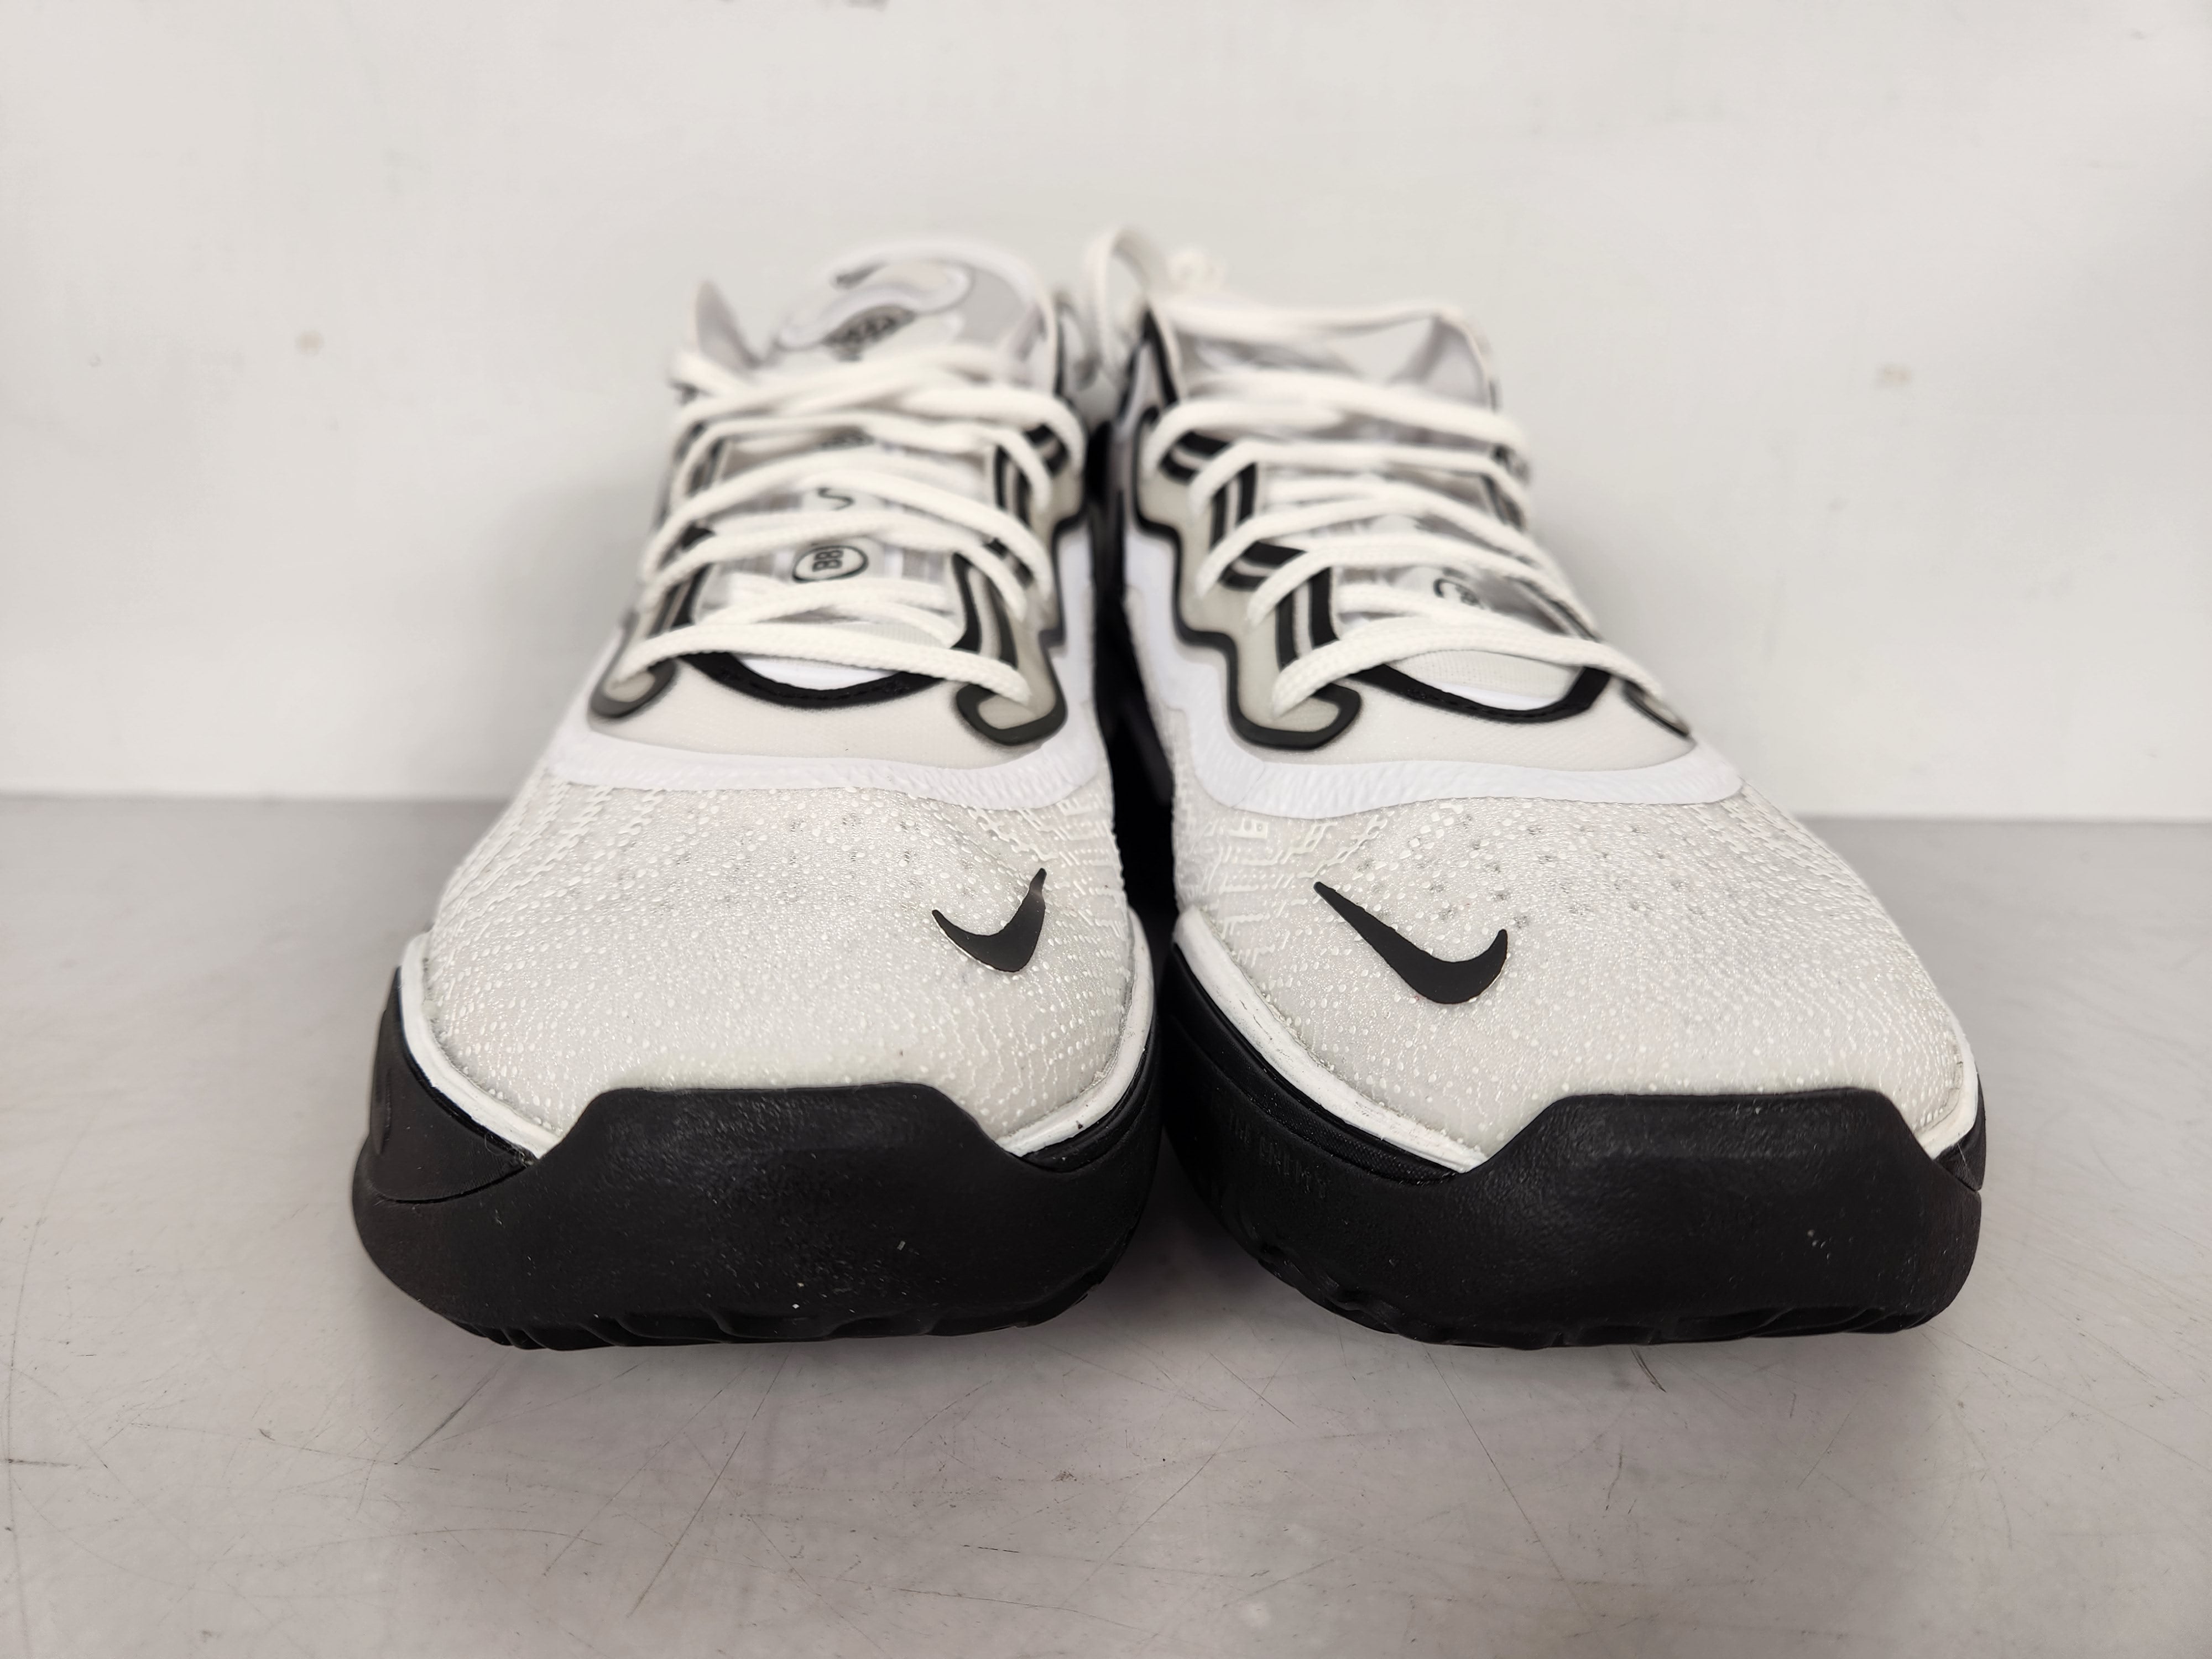 How to Clean Basketball Shoes